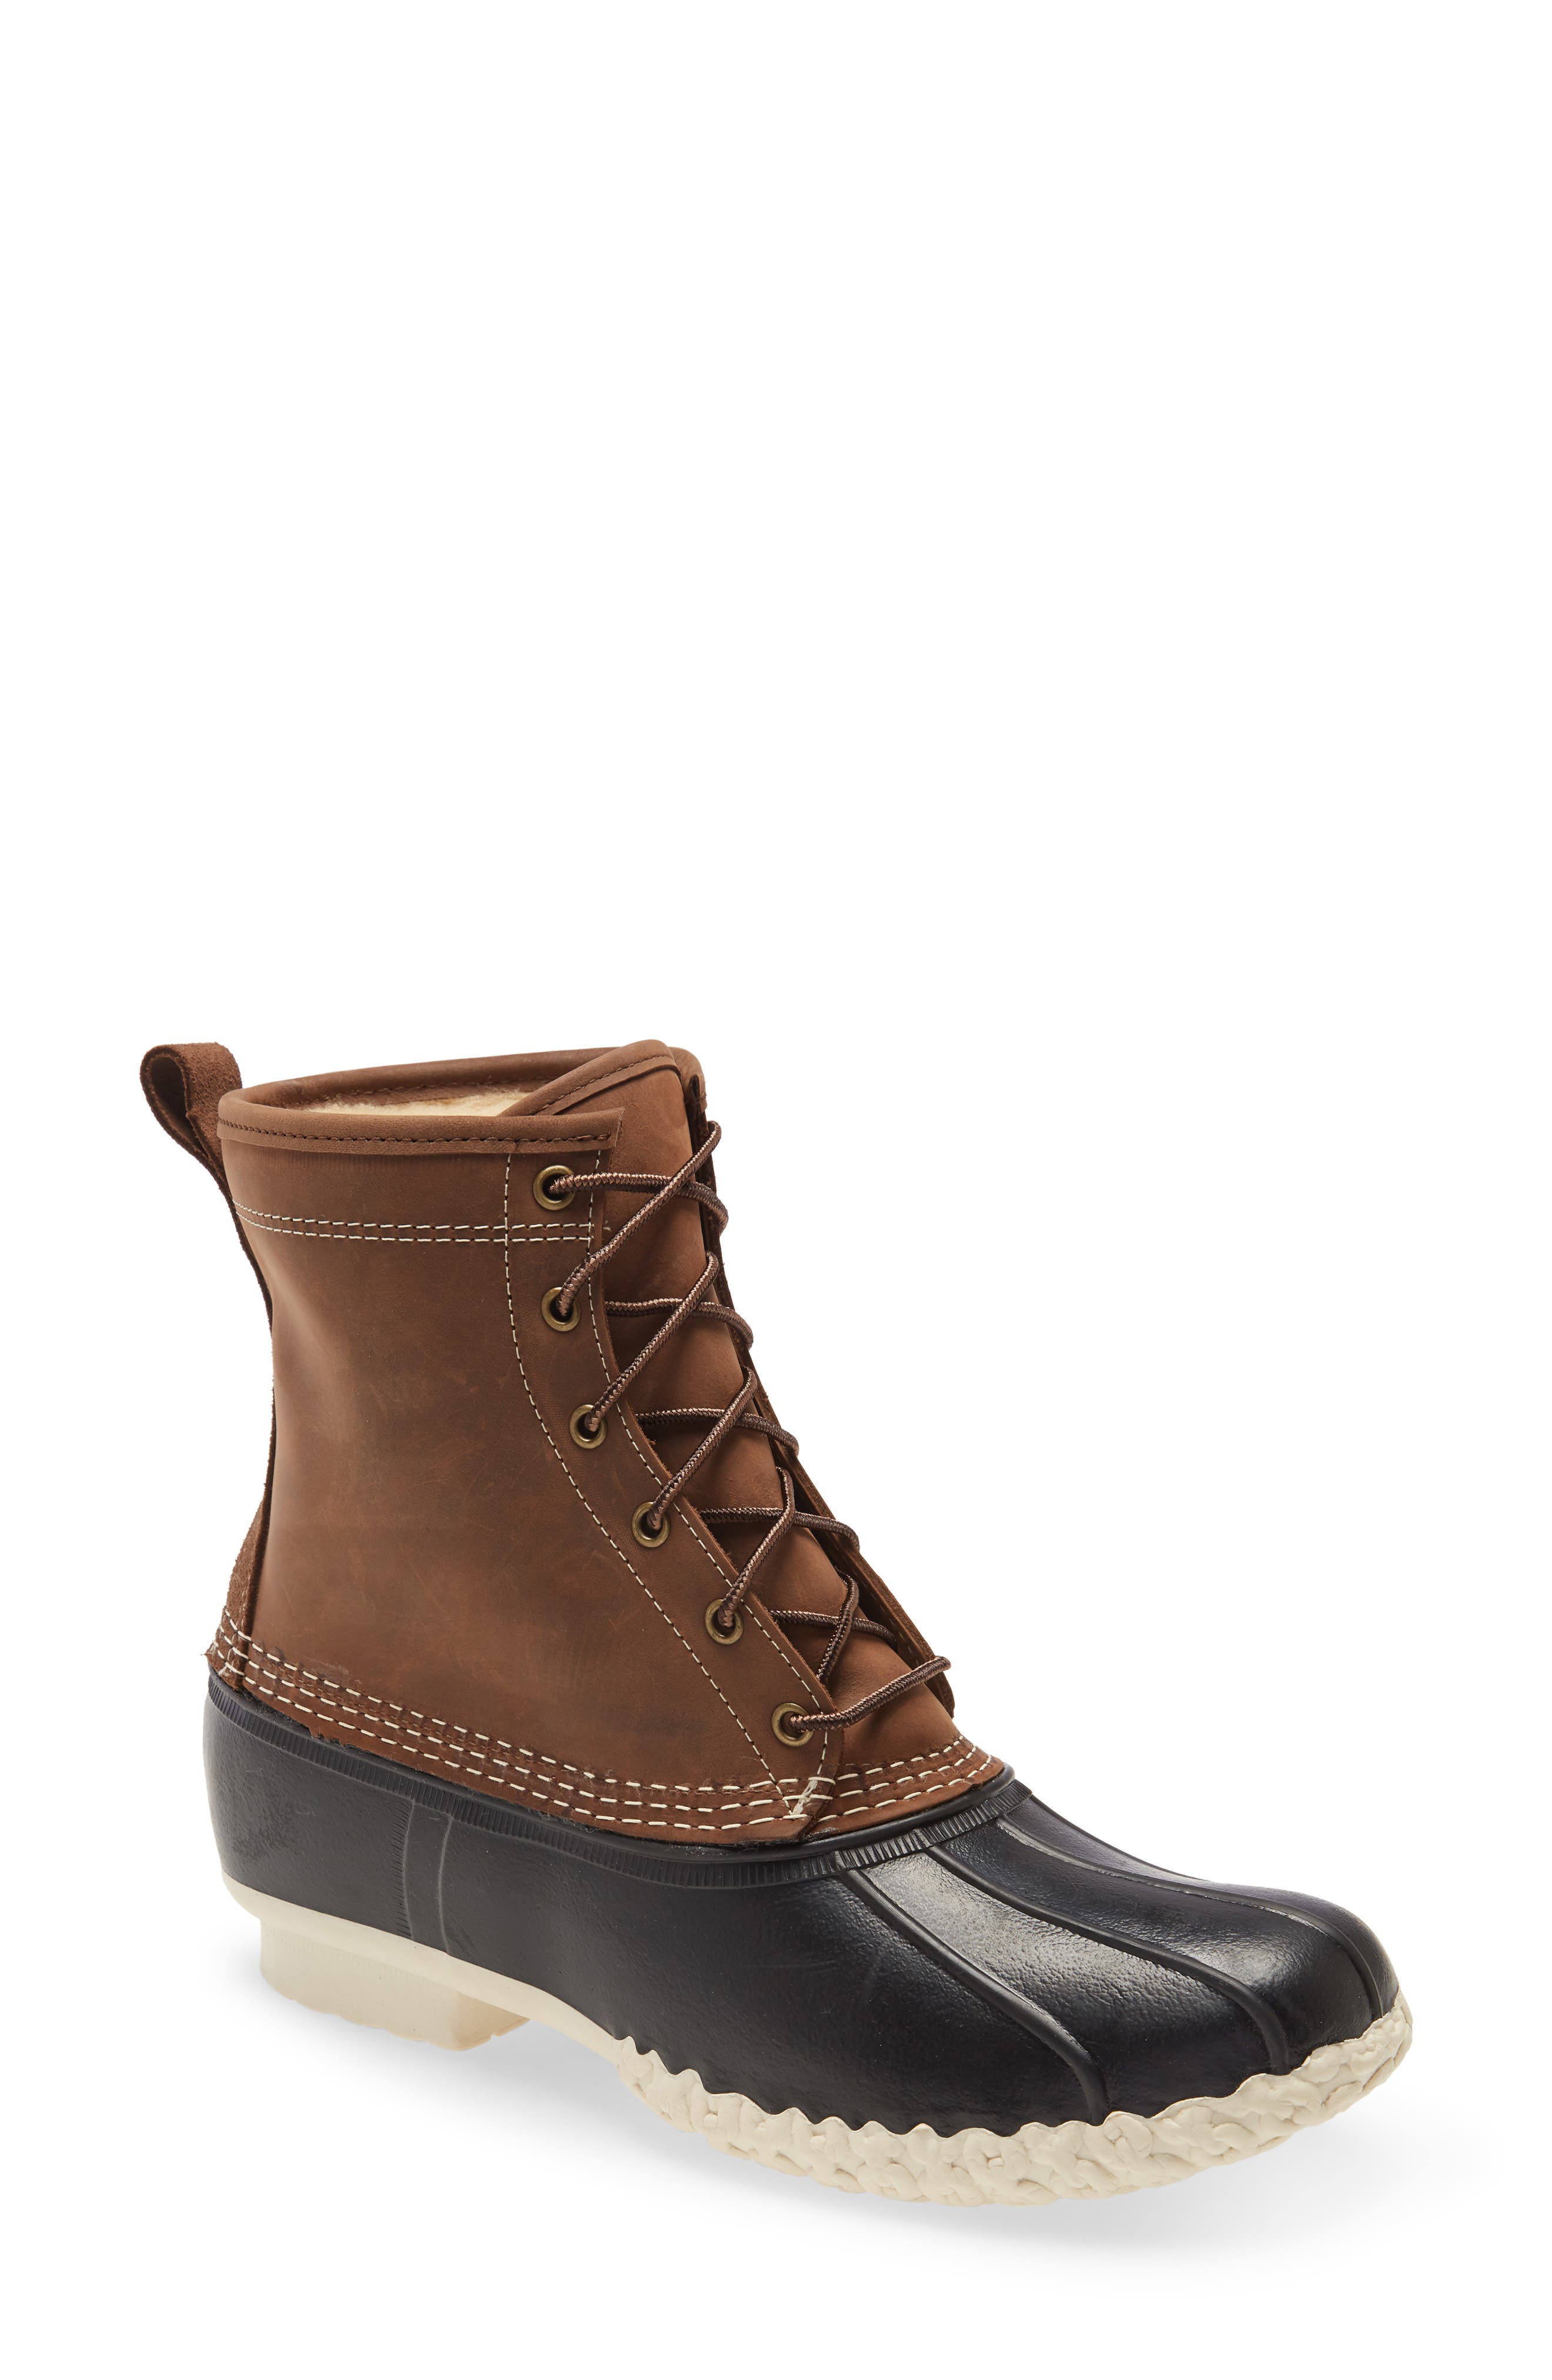 ll bean black leather boots